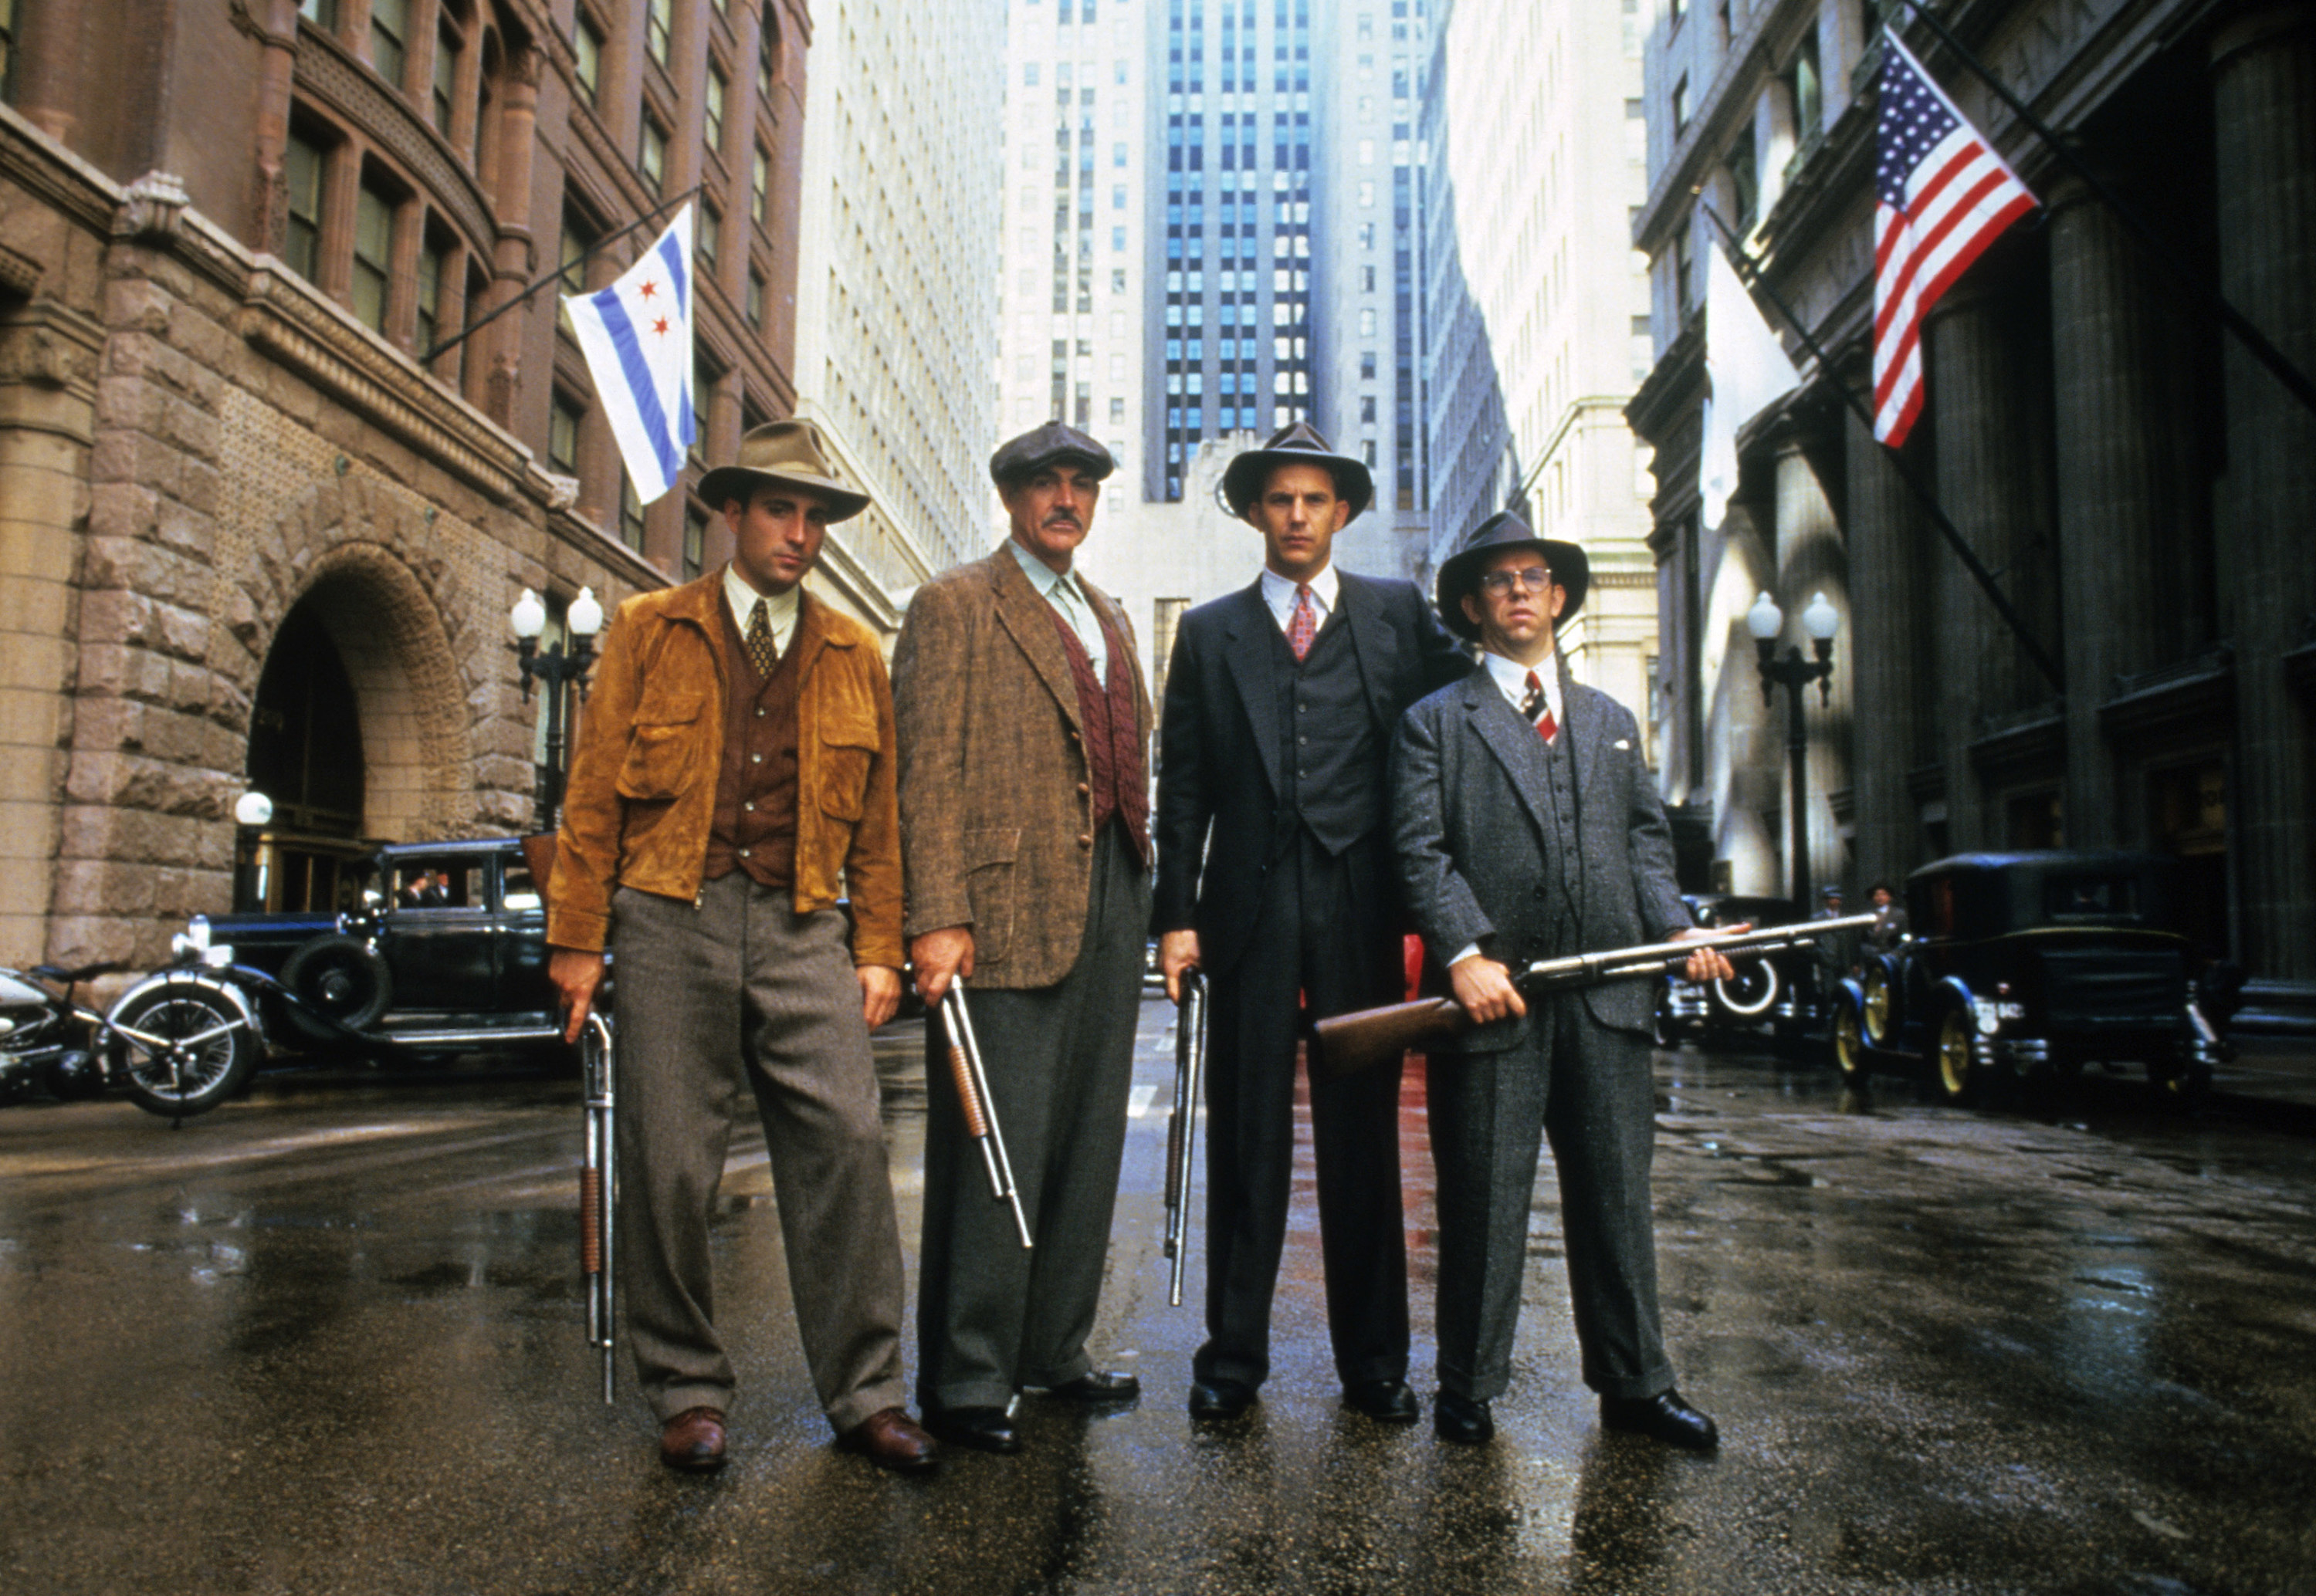 A group of men stand in the street, holding guns